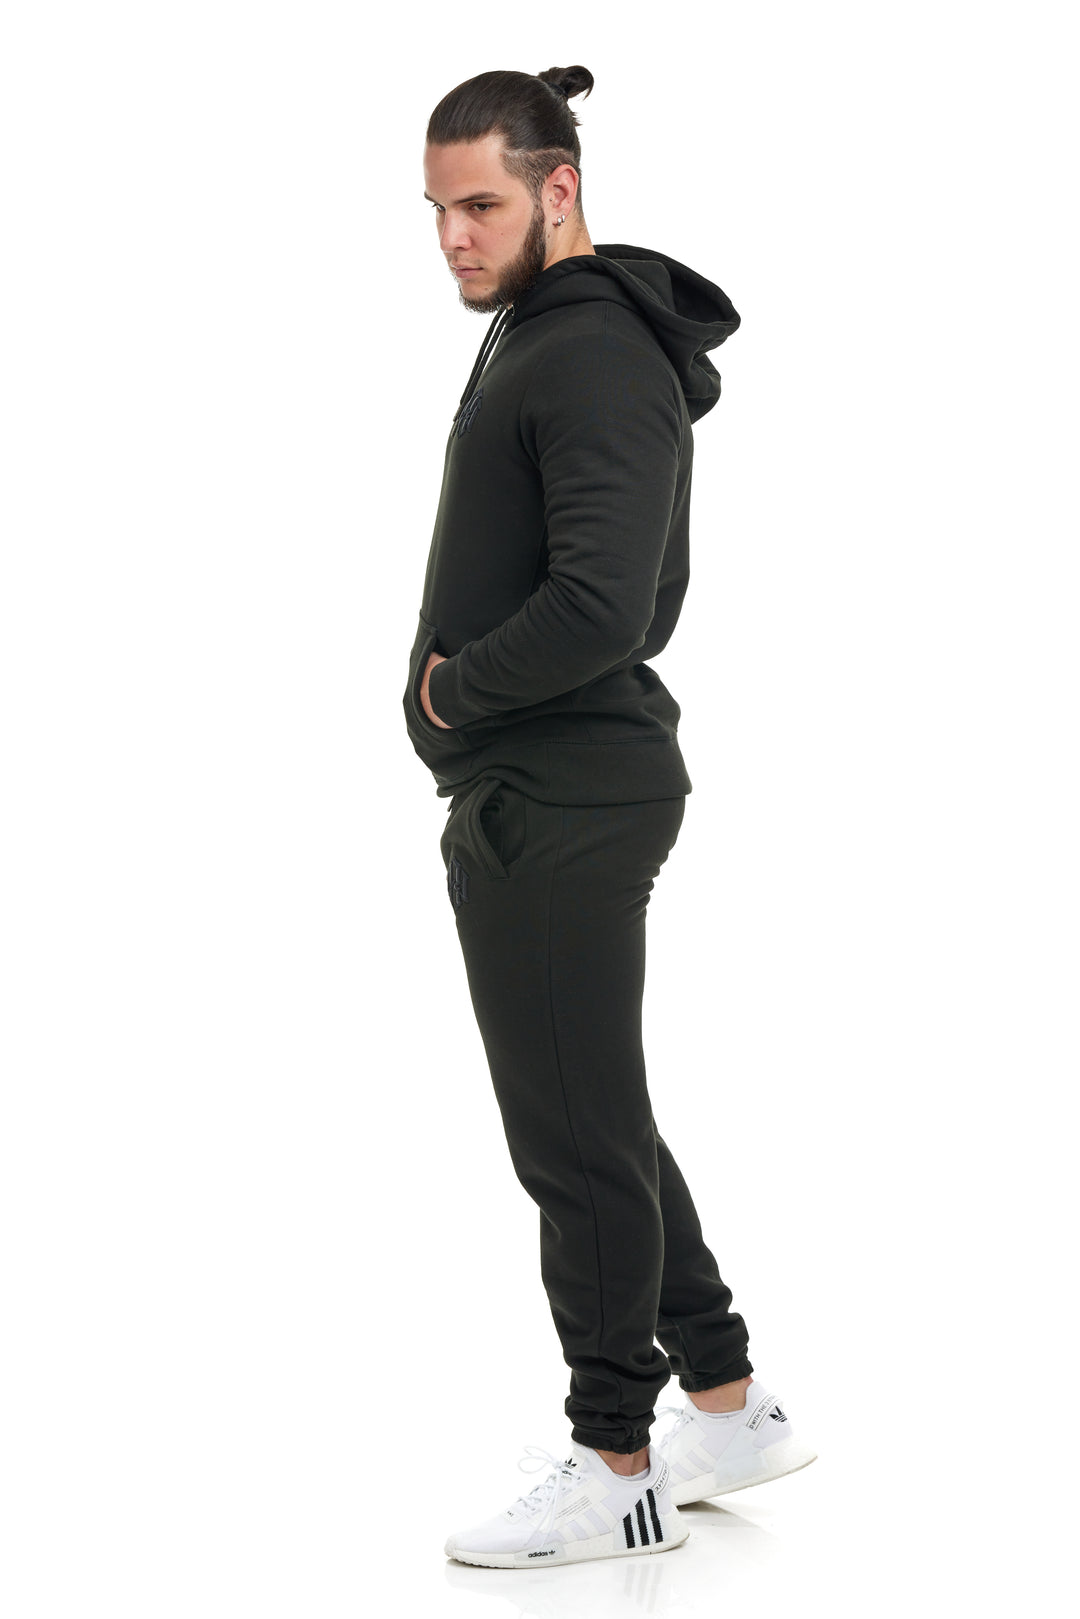 Young man modeling/wearing the Black Colored Premium 400gsm Heavyweight Sweatpants by RENOWNED WEAR